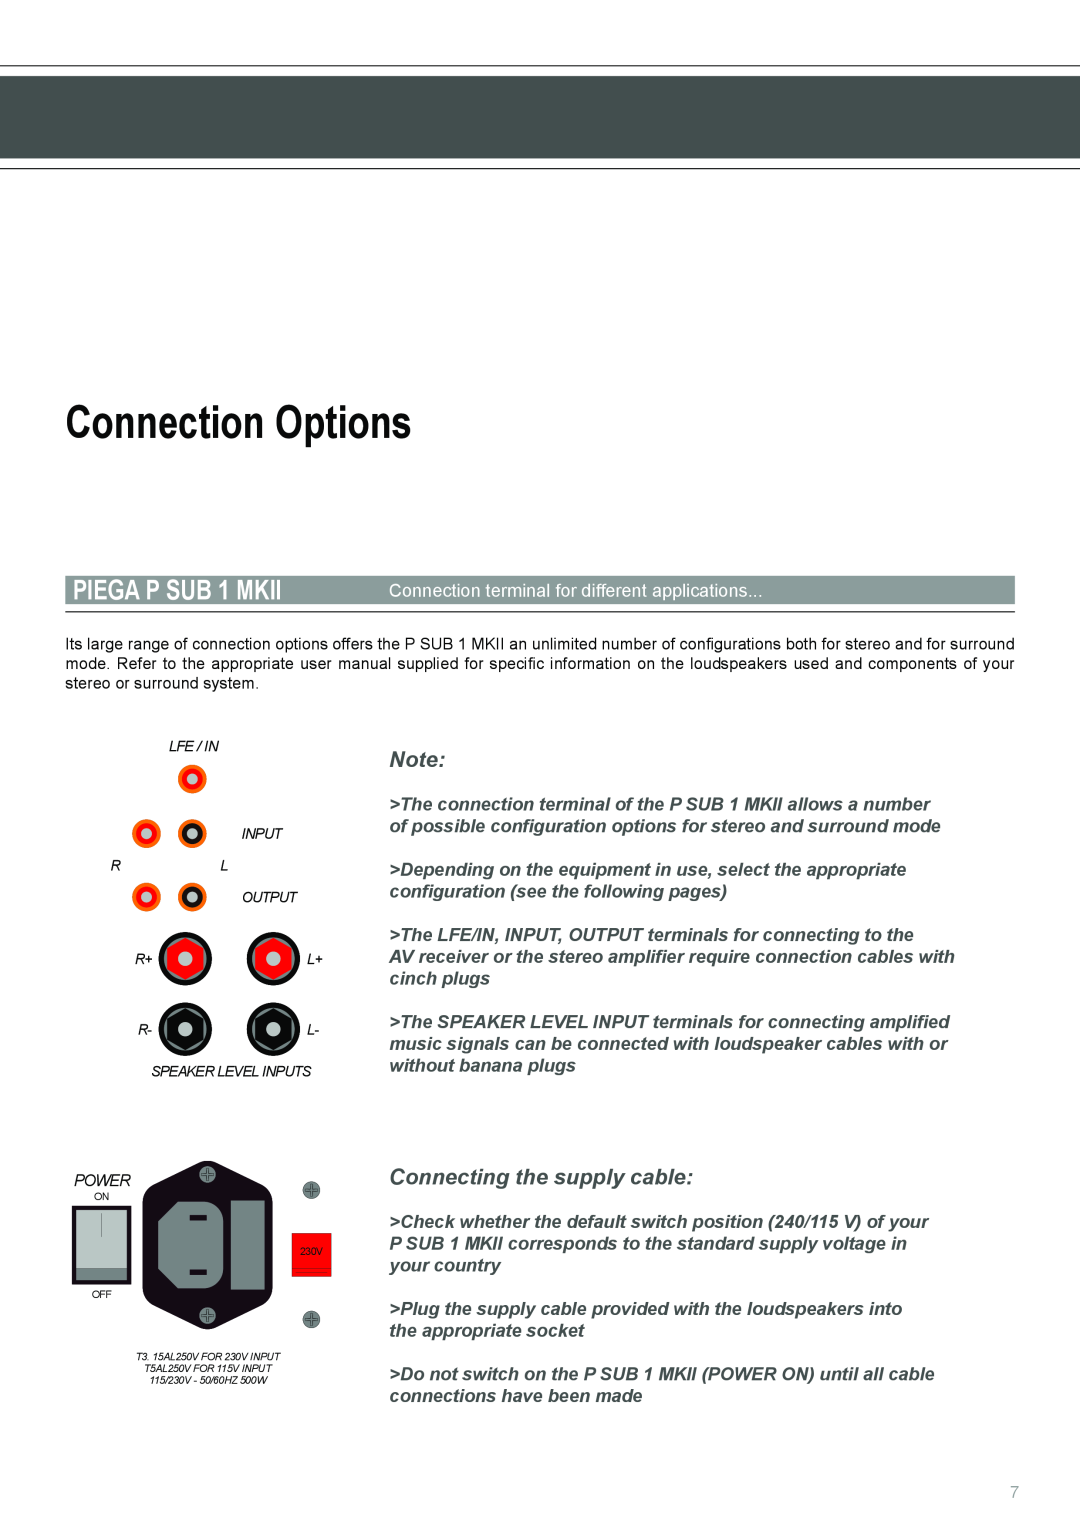 Piega SUB 1 MKII Connection Options, Connecting the supply cable, Connection terminal for different applications 